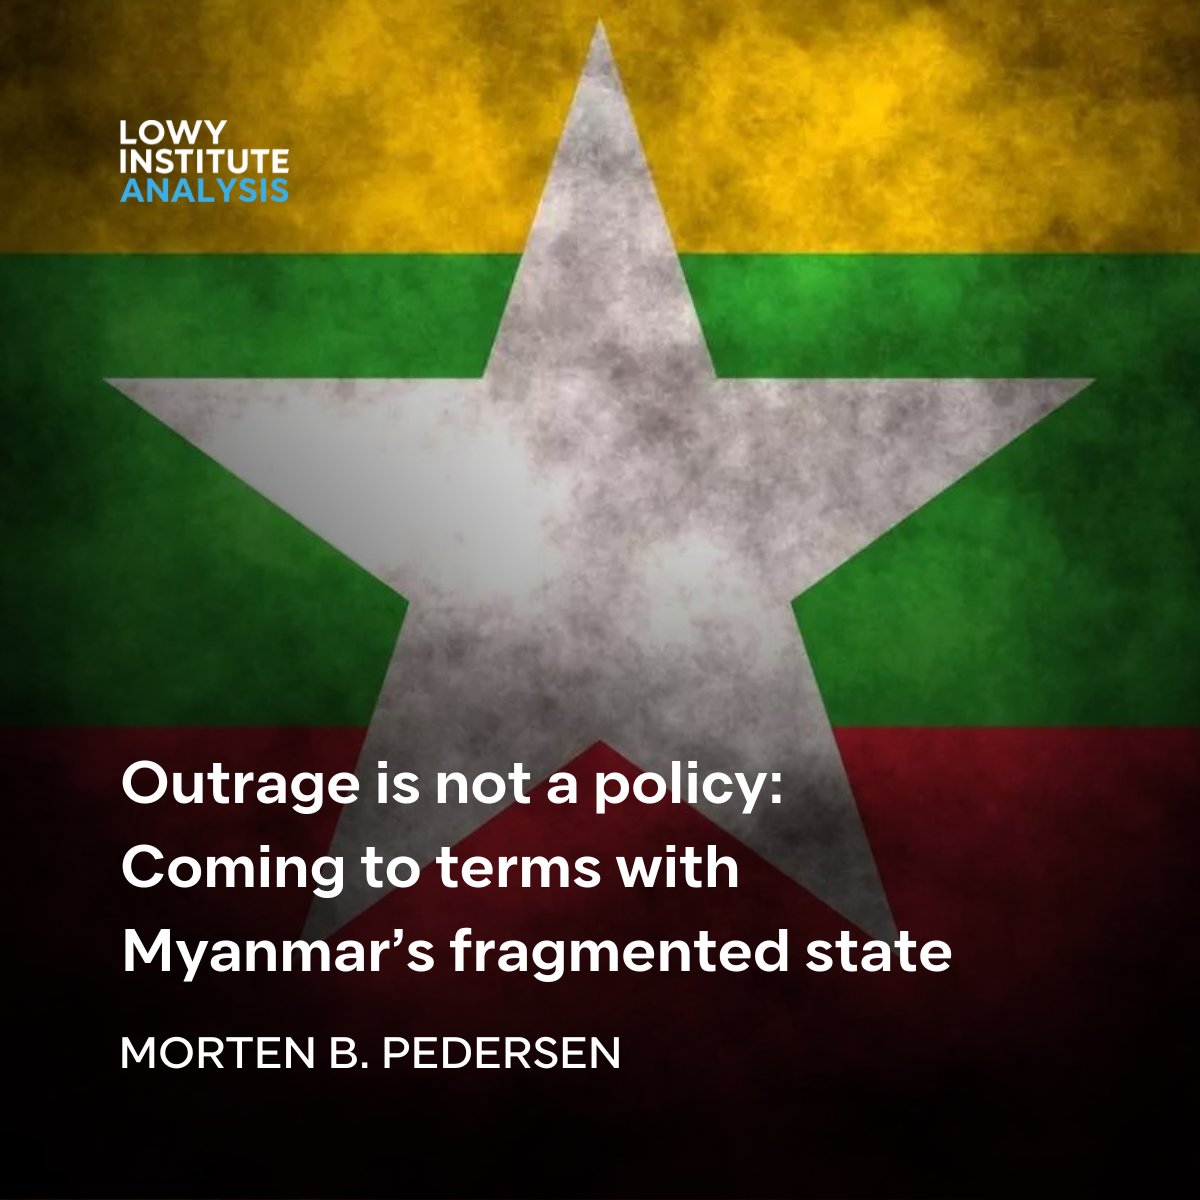 To remain relevant to #Myanmar’s future development, the West should support parallel state-building in liberated areas. lowyinstitute.org/publications/o…